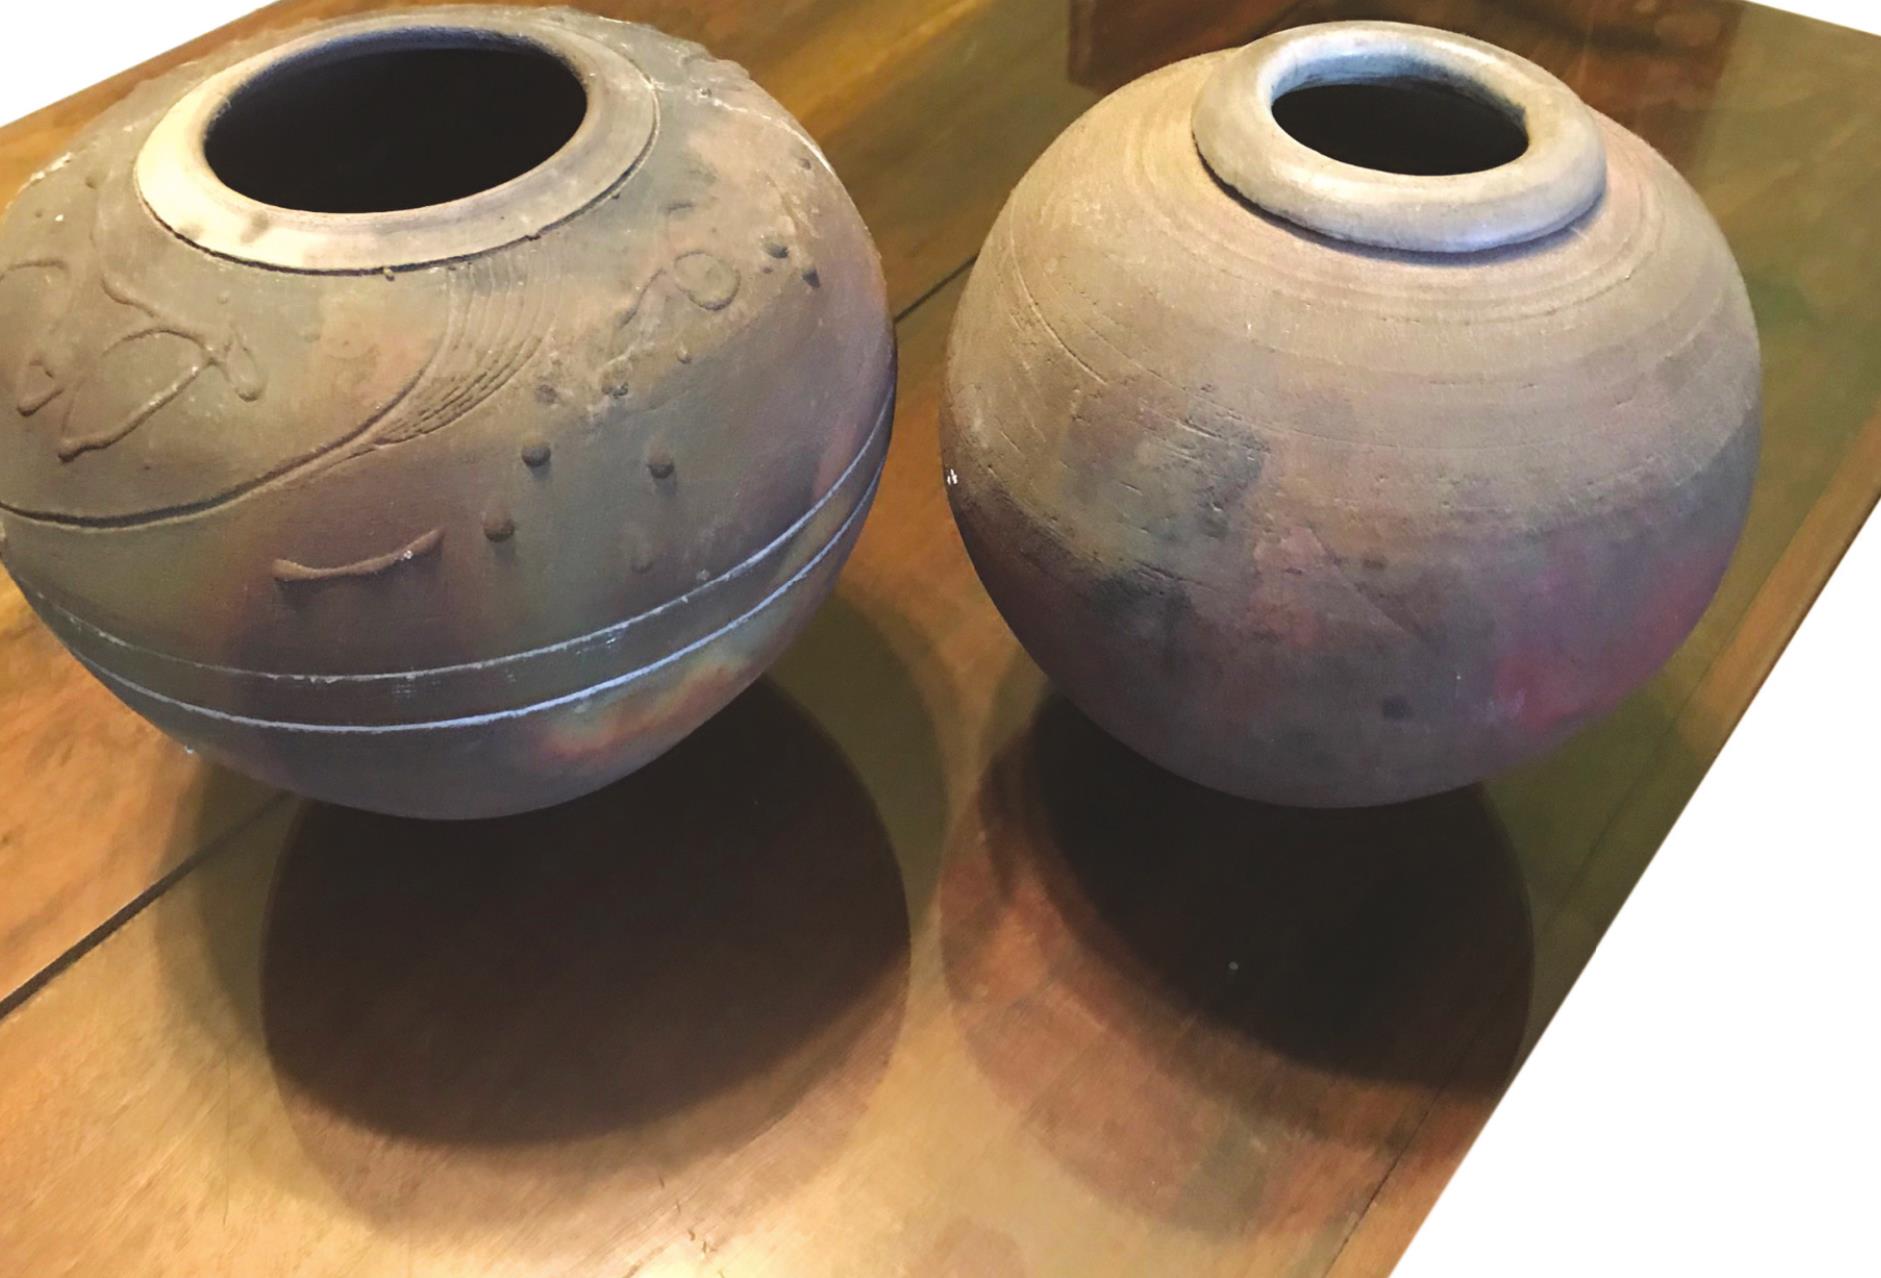 Provided This photo shows two pots made by Stephen Walker.